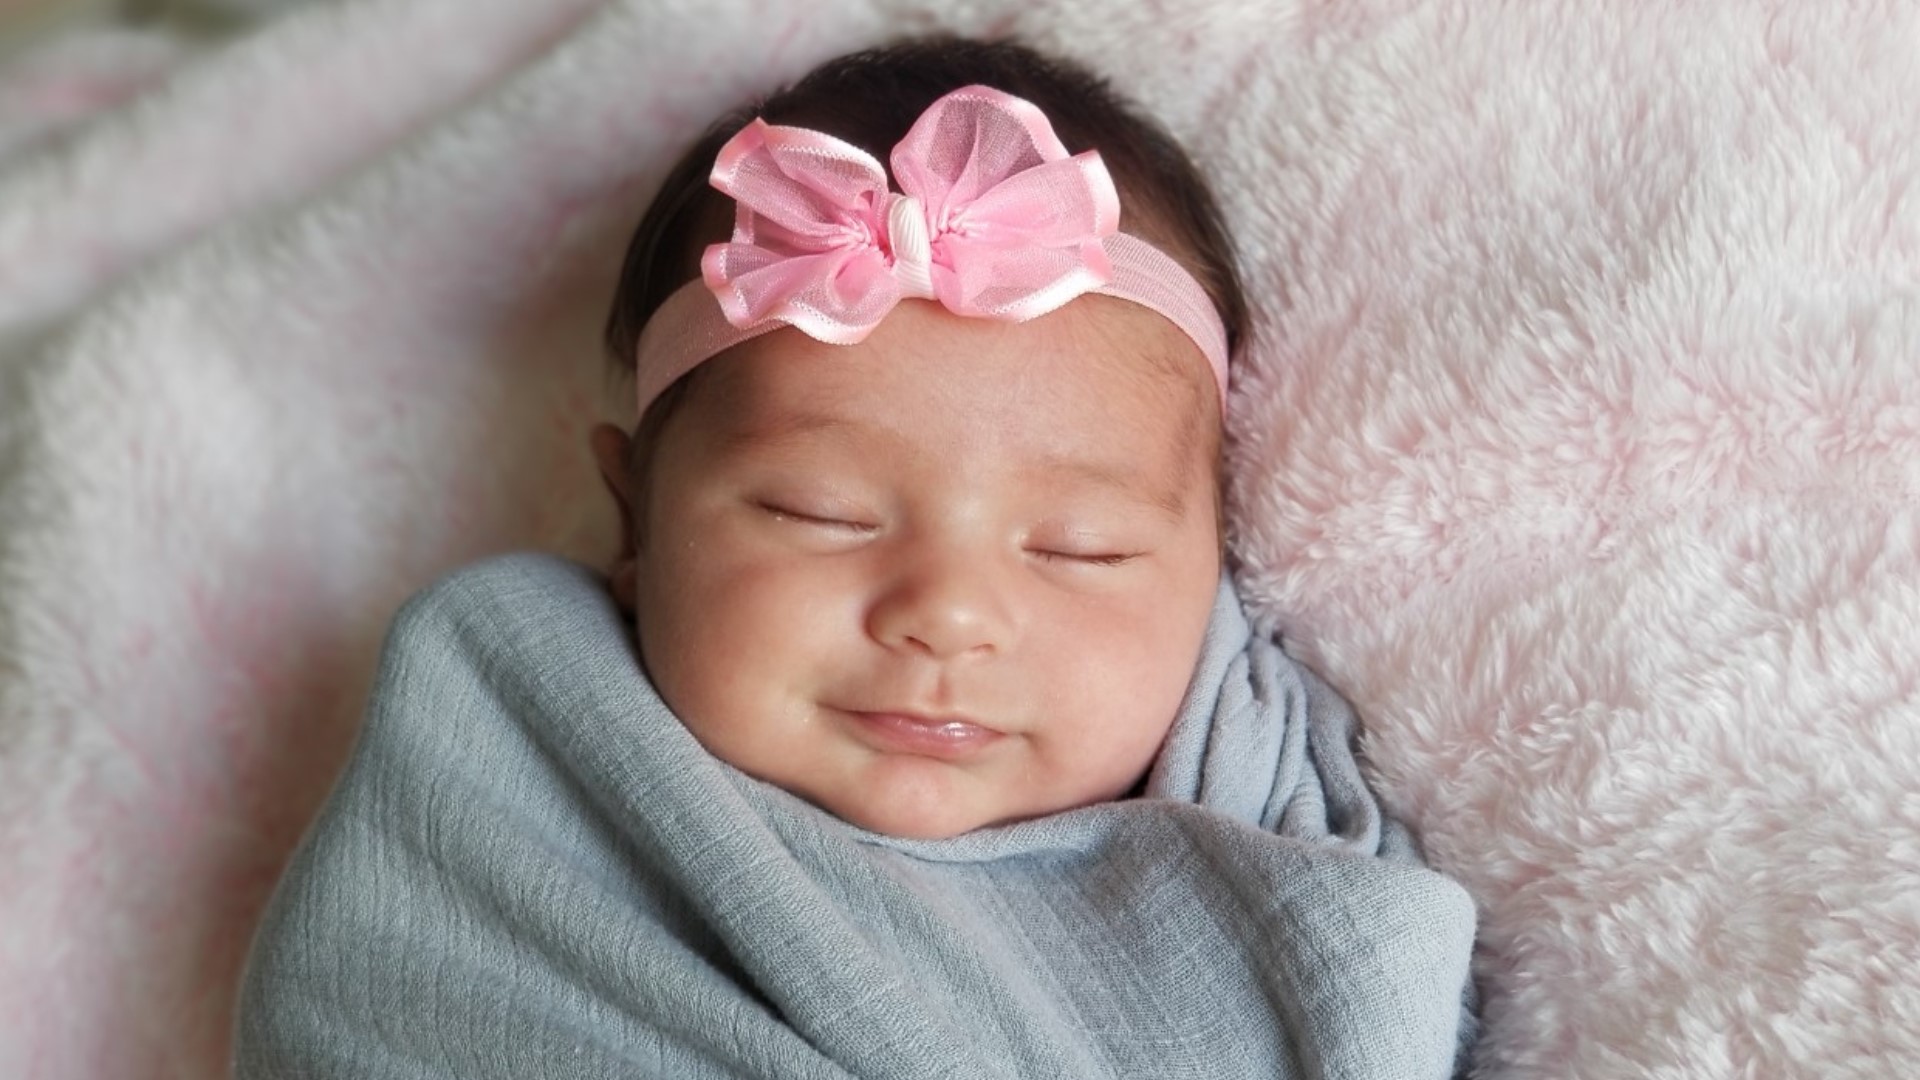 A Rogers family is headed to Fort Worth for a procedure to save their baby's heart. 6-week-old Aurora already has plenty of support from the community.